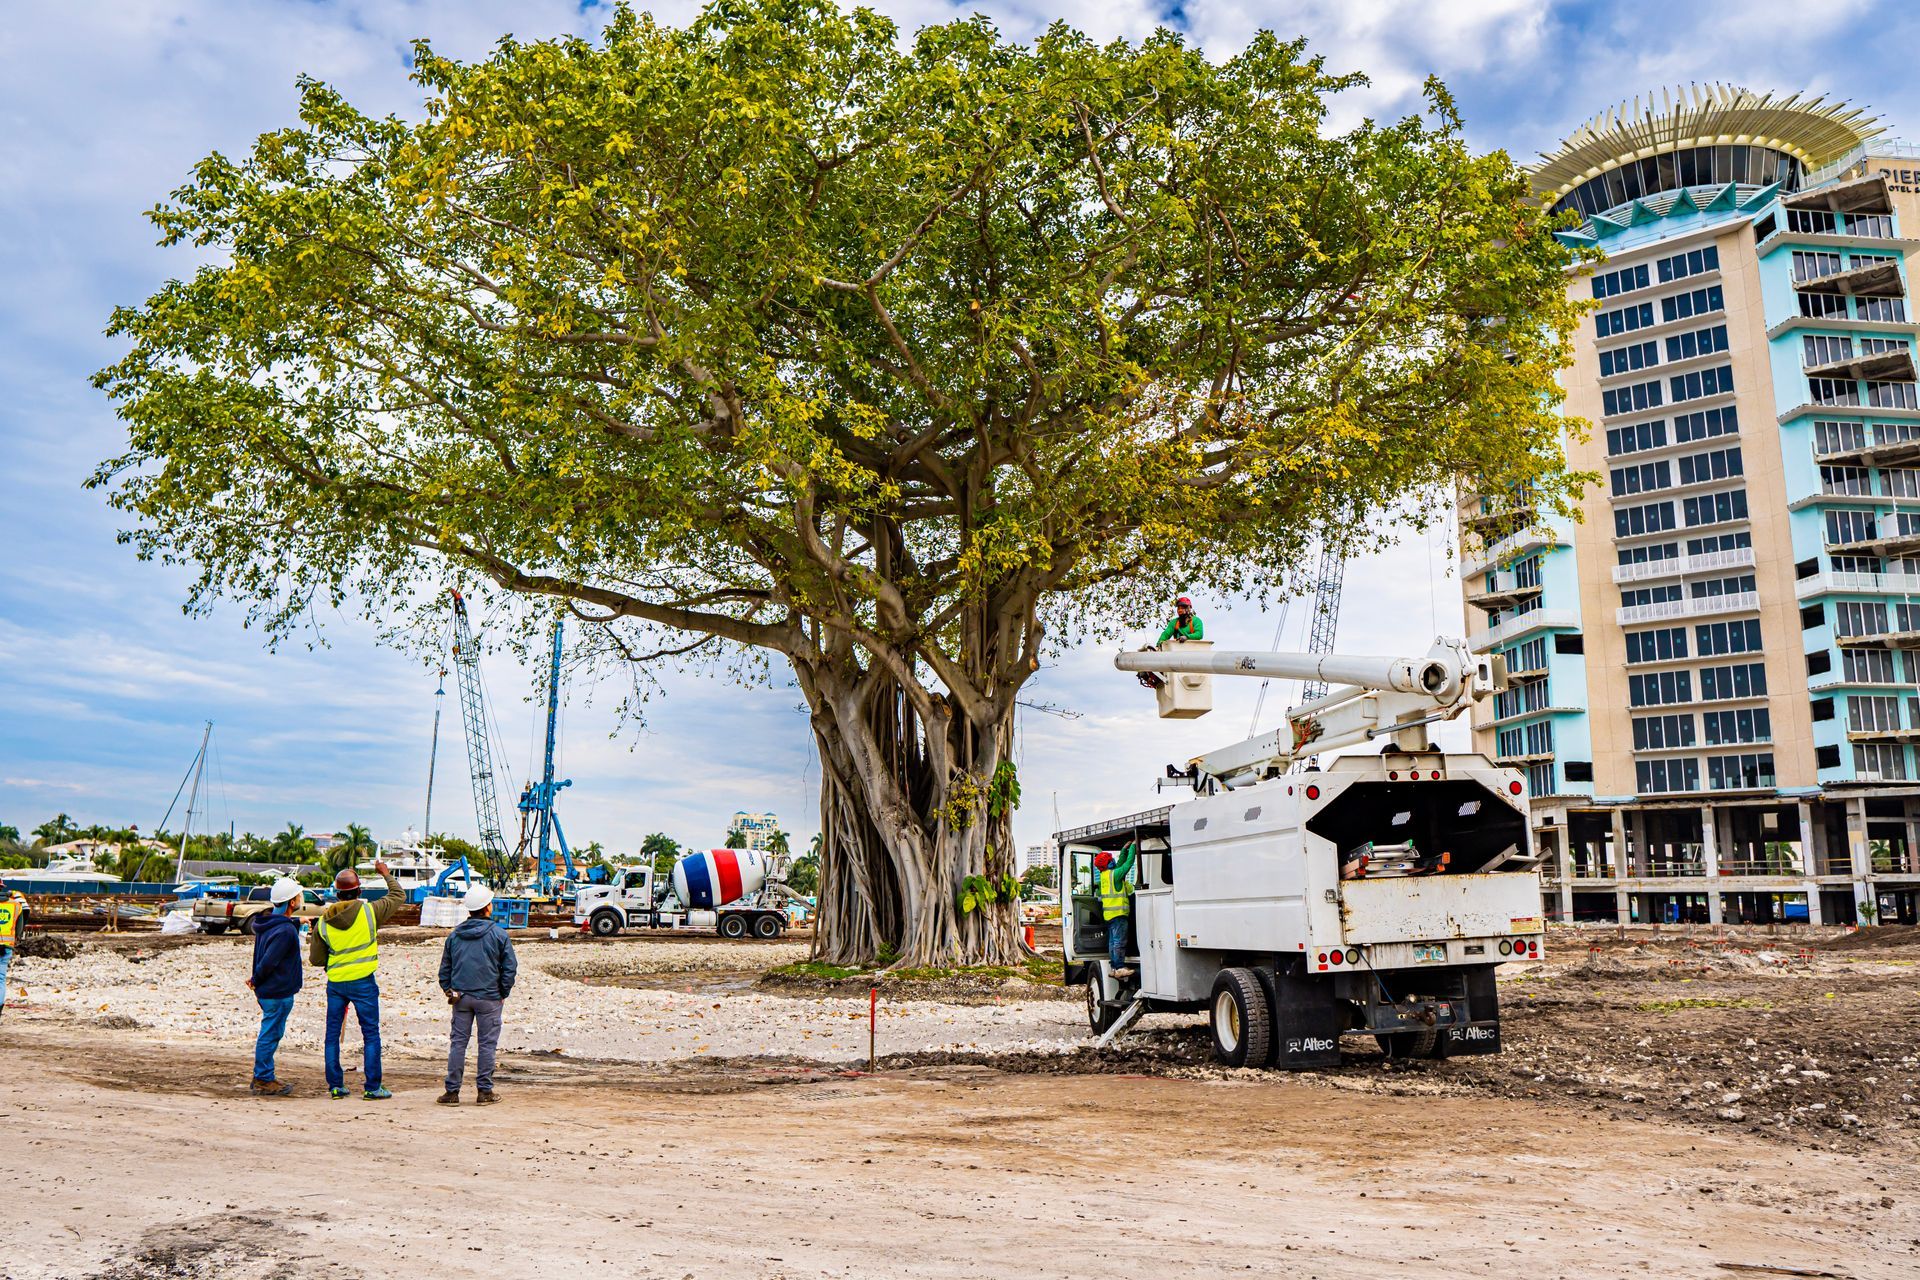 local arborists gather to assess the large tree that needs to be removed from a commercial property in Naples FL